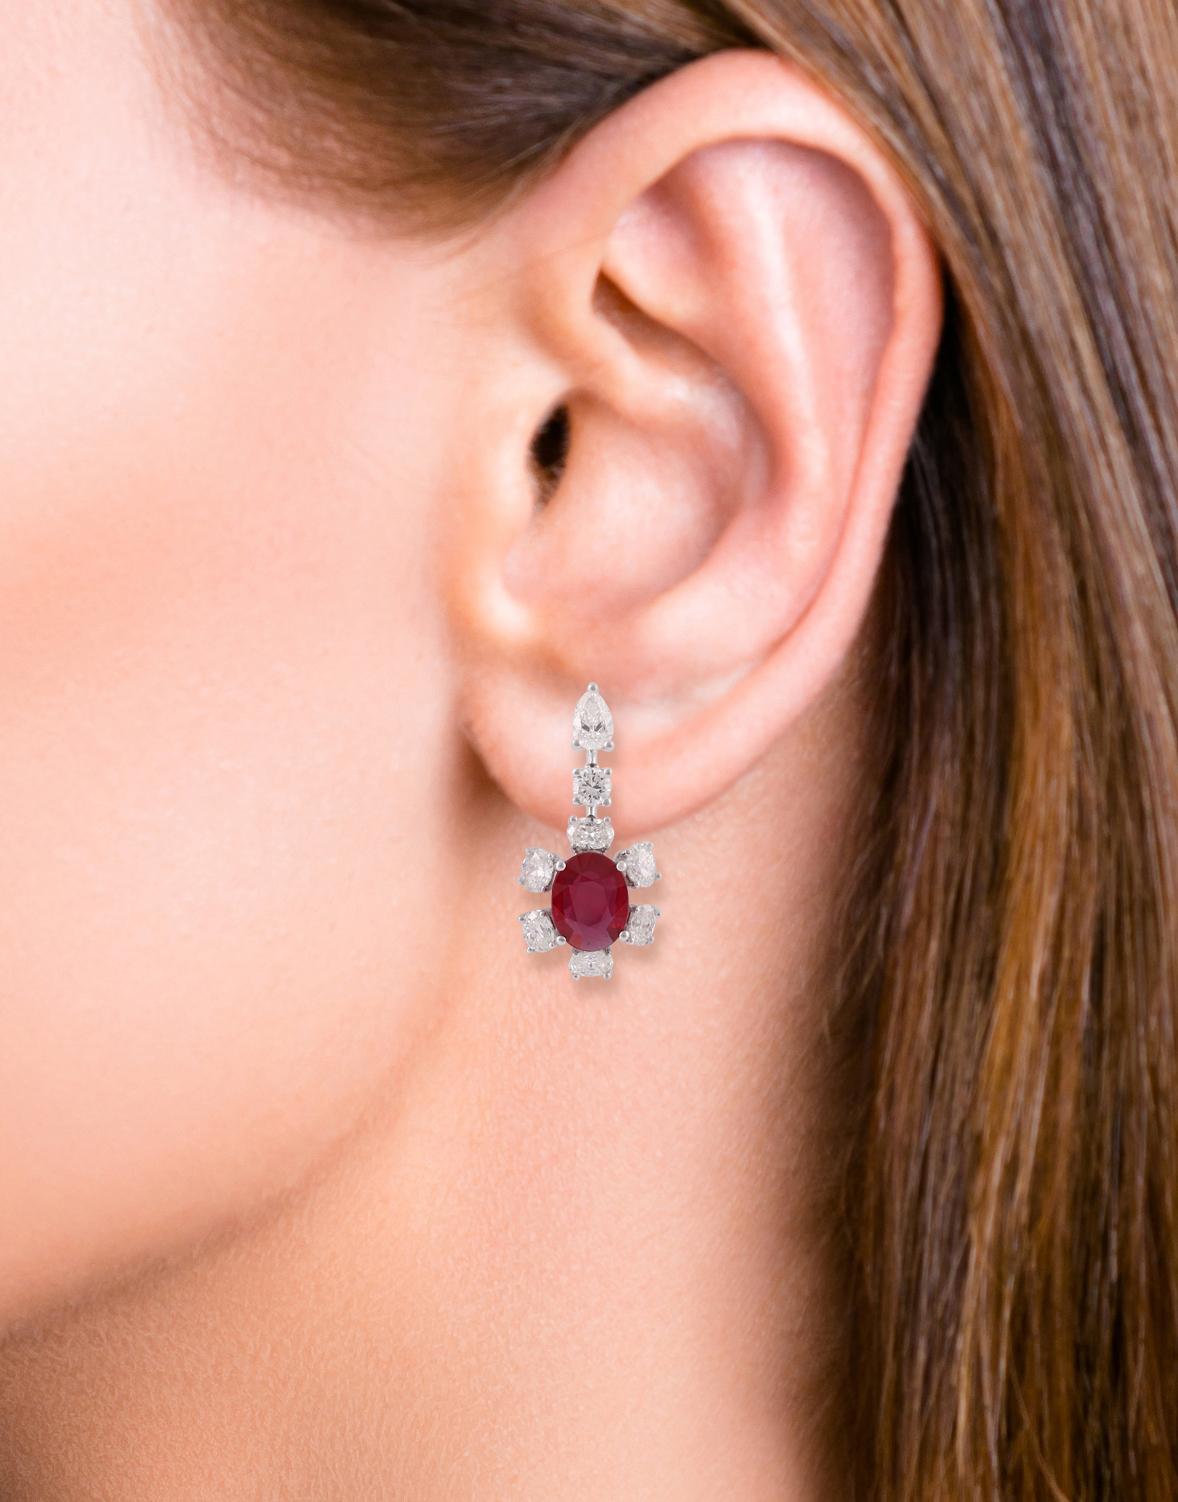 Classical Roman 2.32 Carat Mozambique Pigeon Blood Ruby & Diamond Stud Earring in 18K White gold For Sale